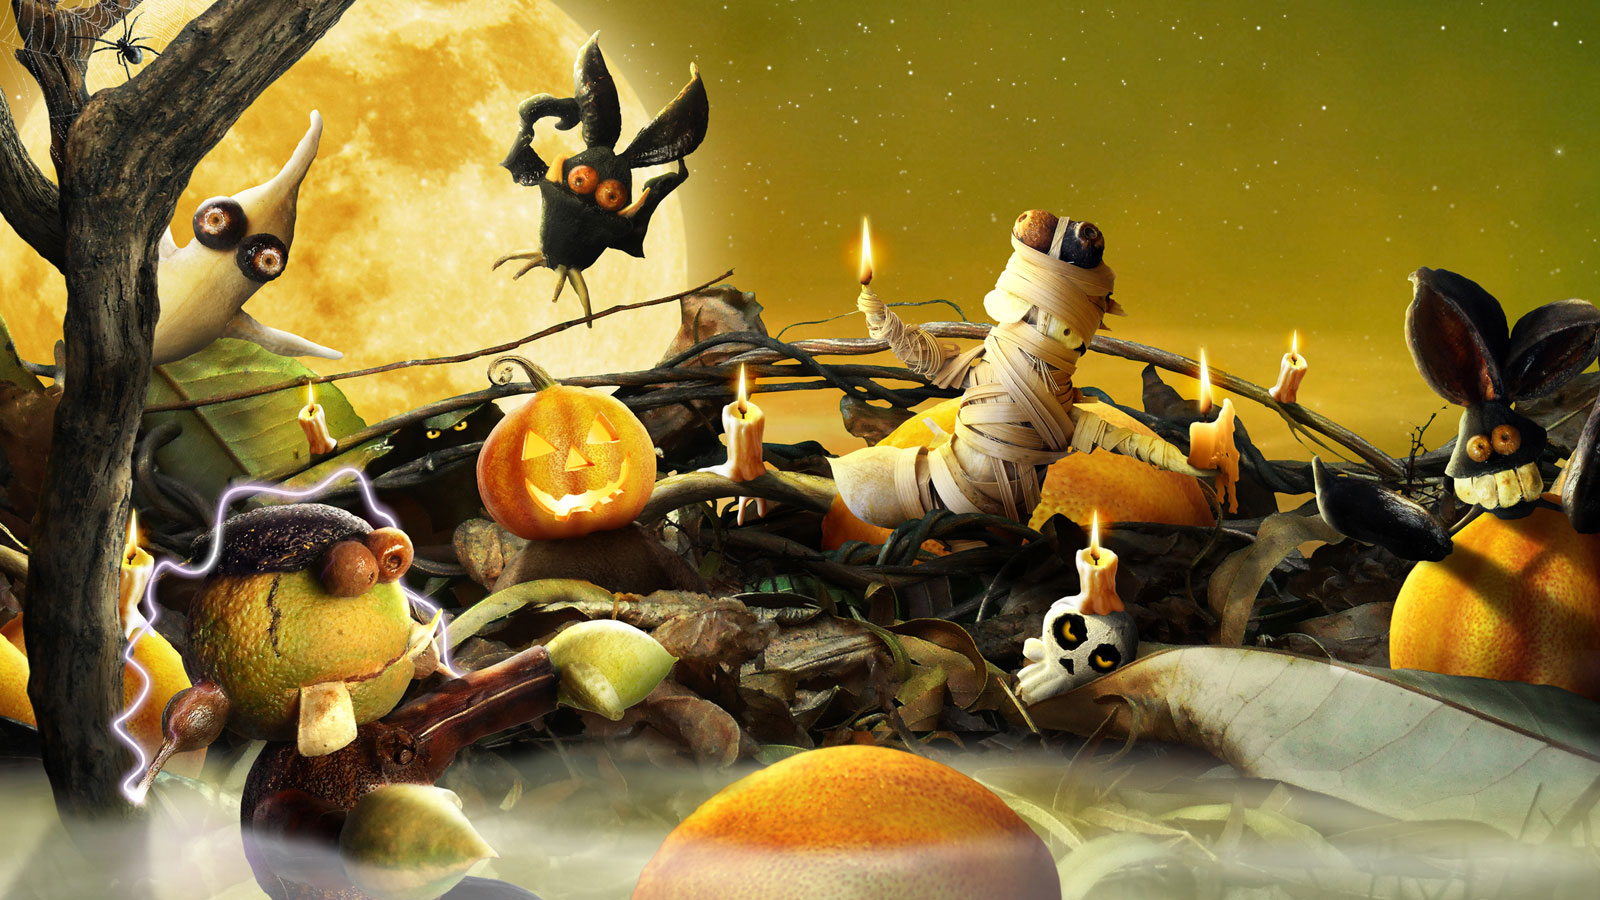 Spooky and Funny Halloween Wallpapers.